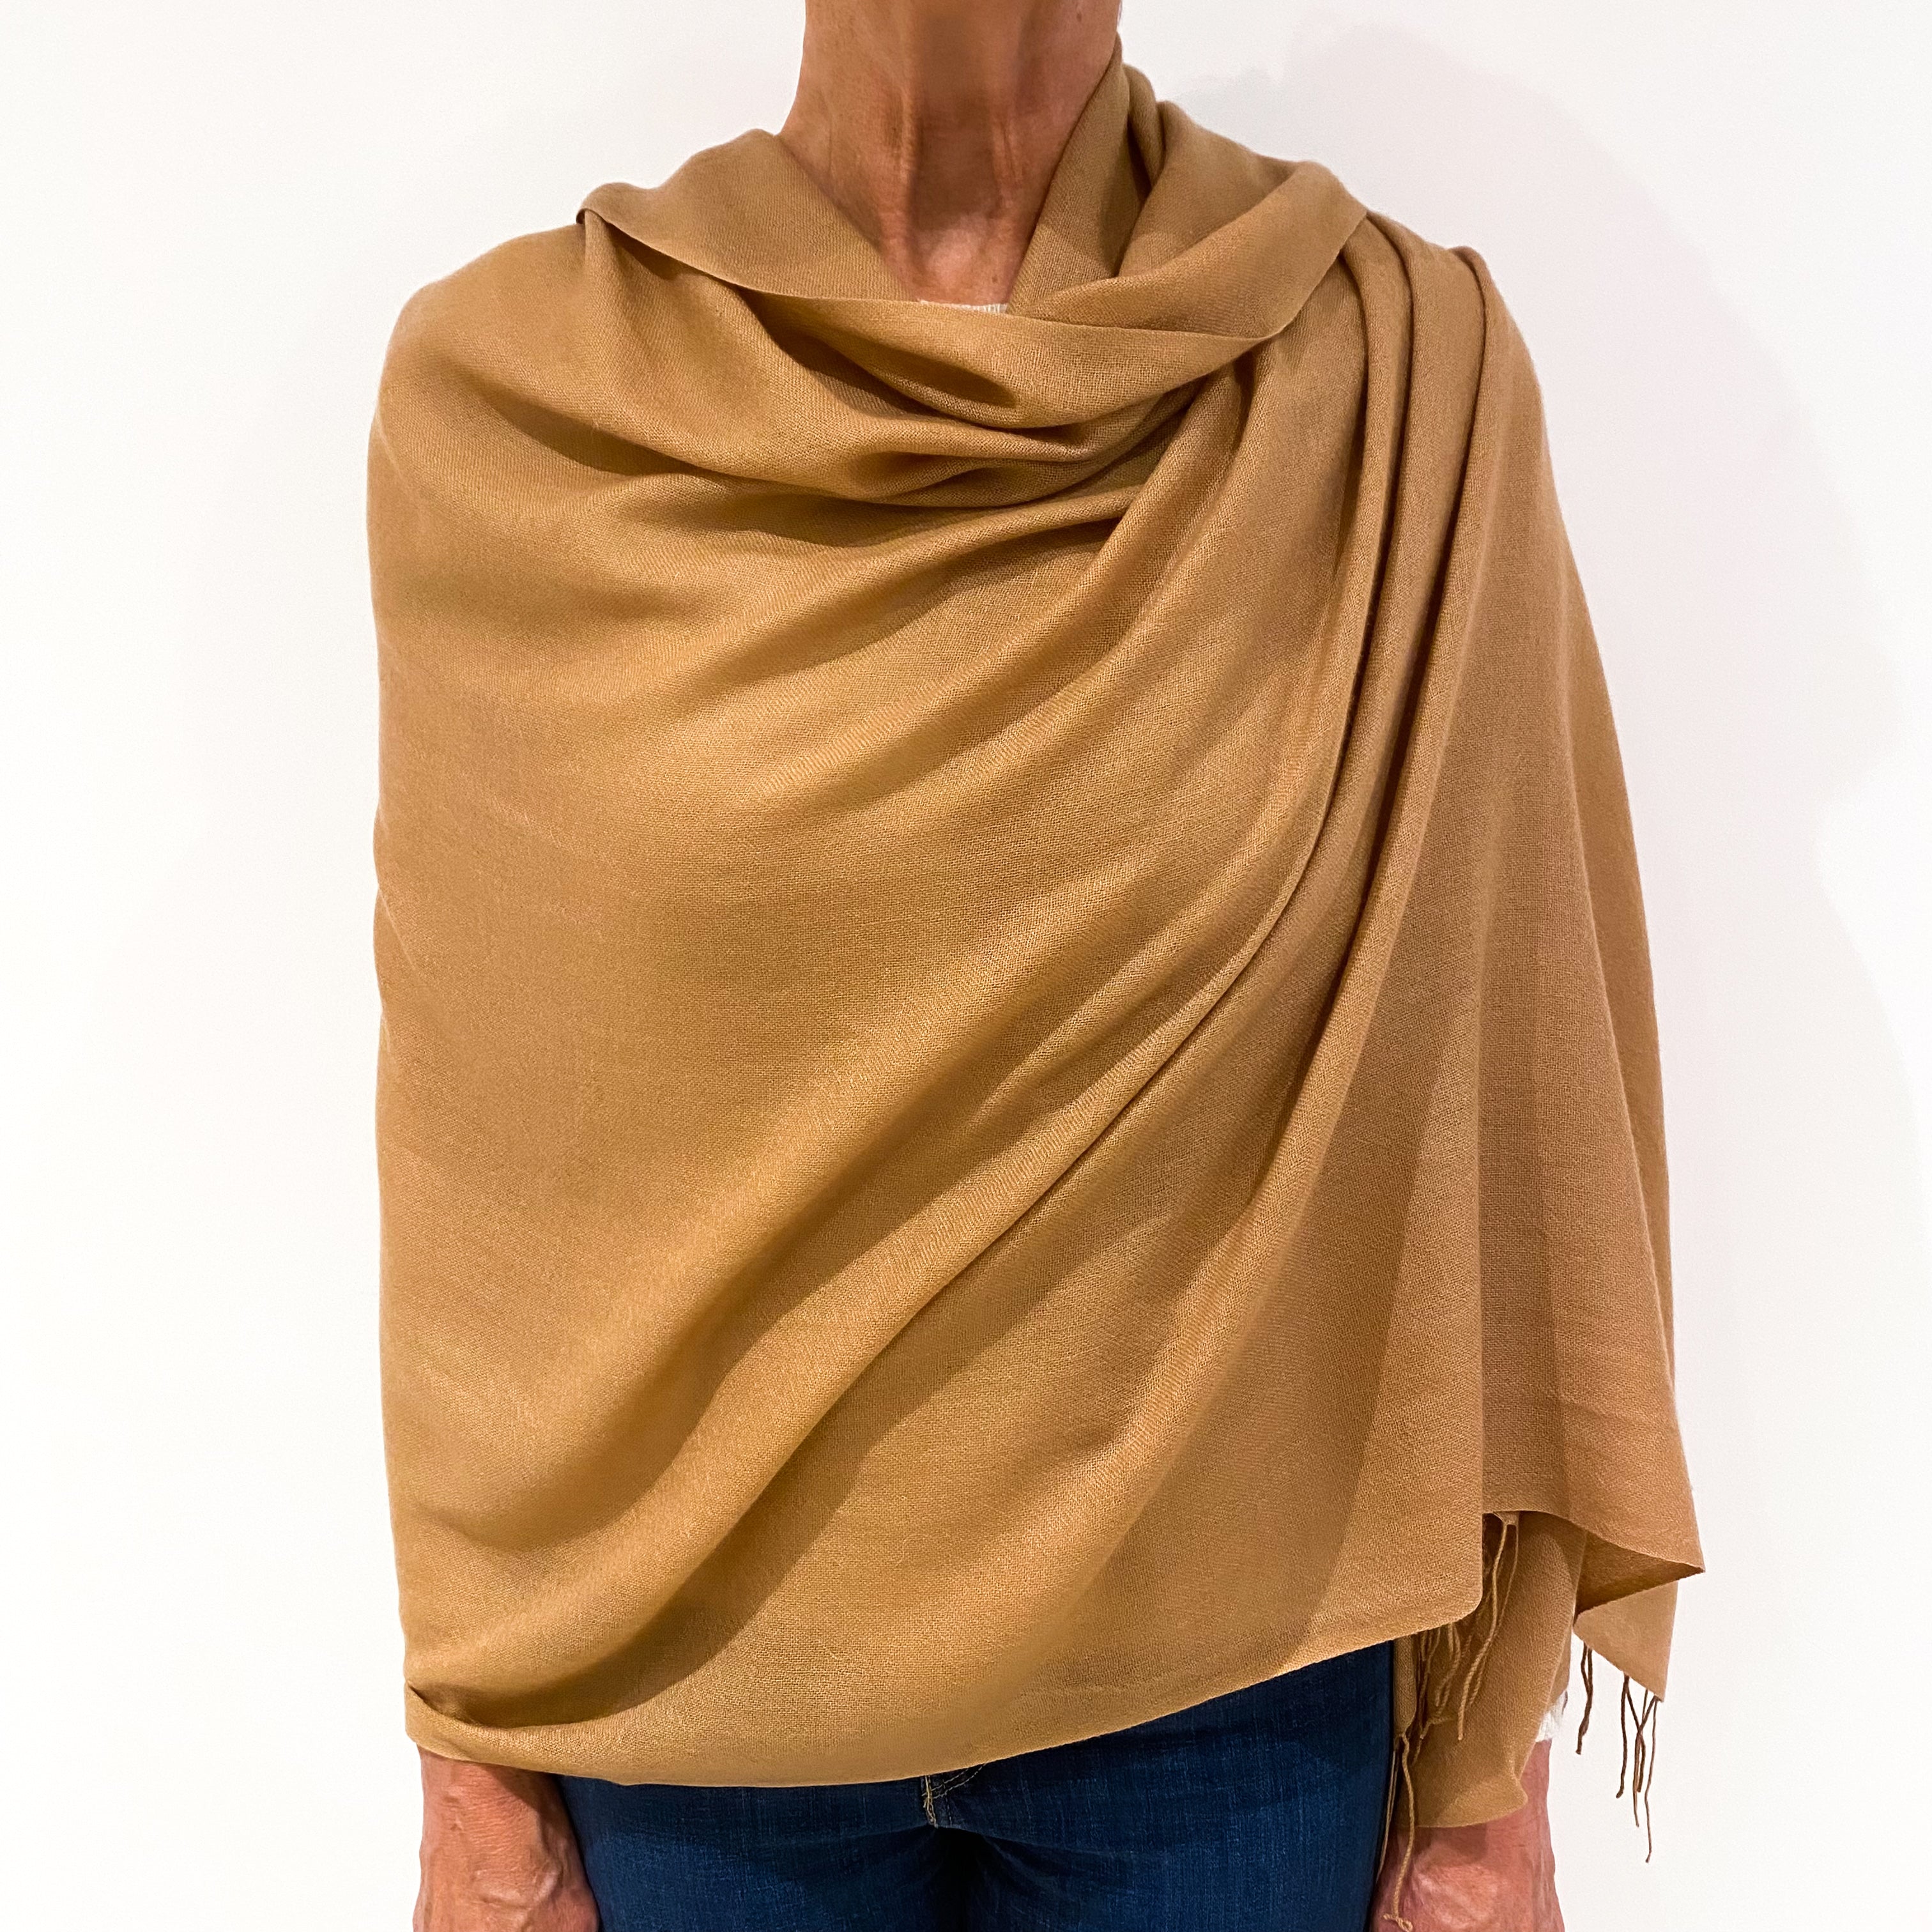 Toffee Brown Brand New Cashmere Pashmina Scarf